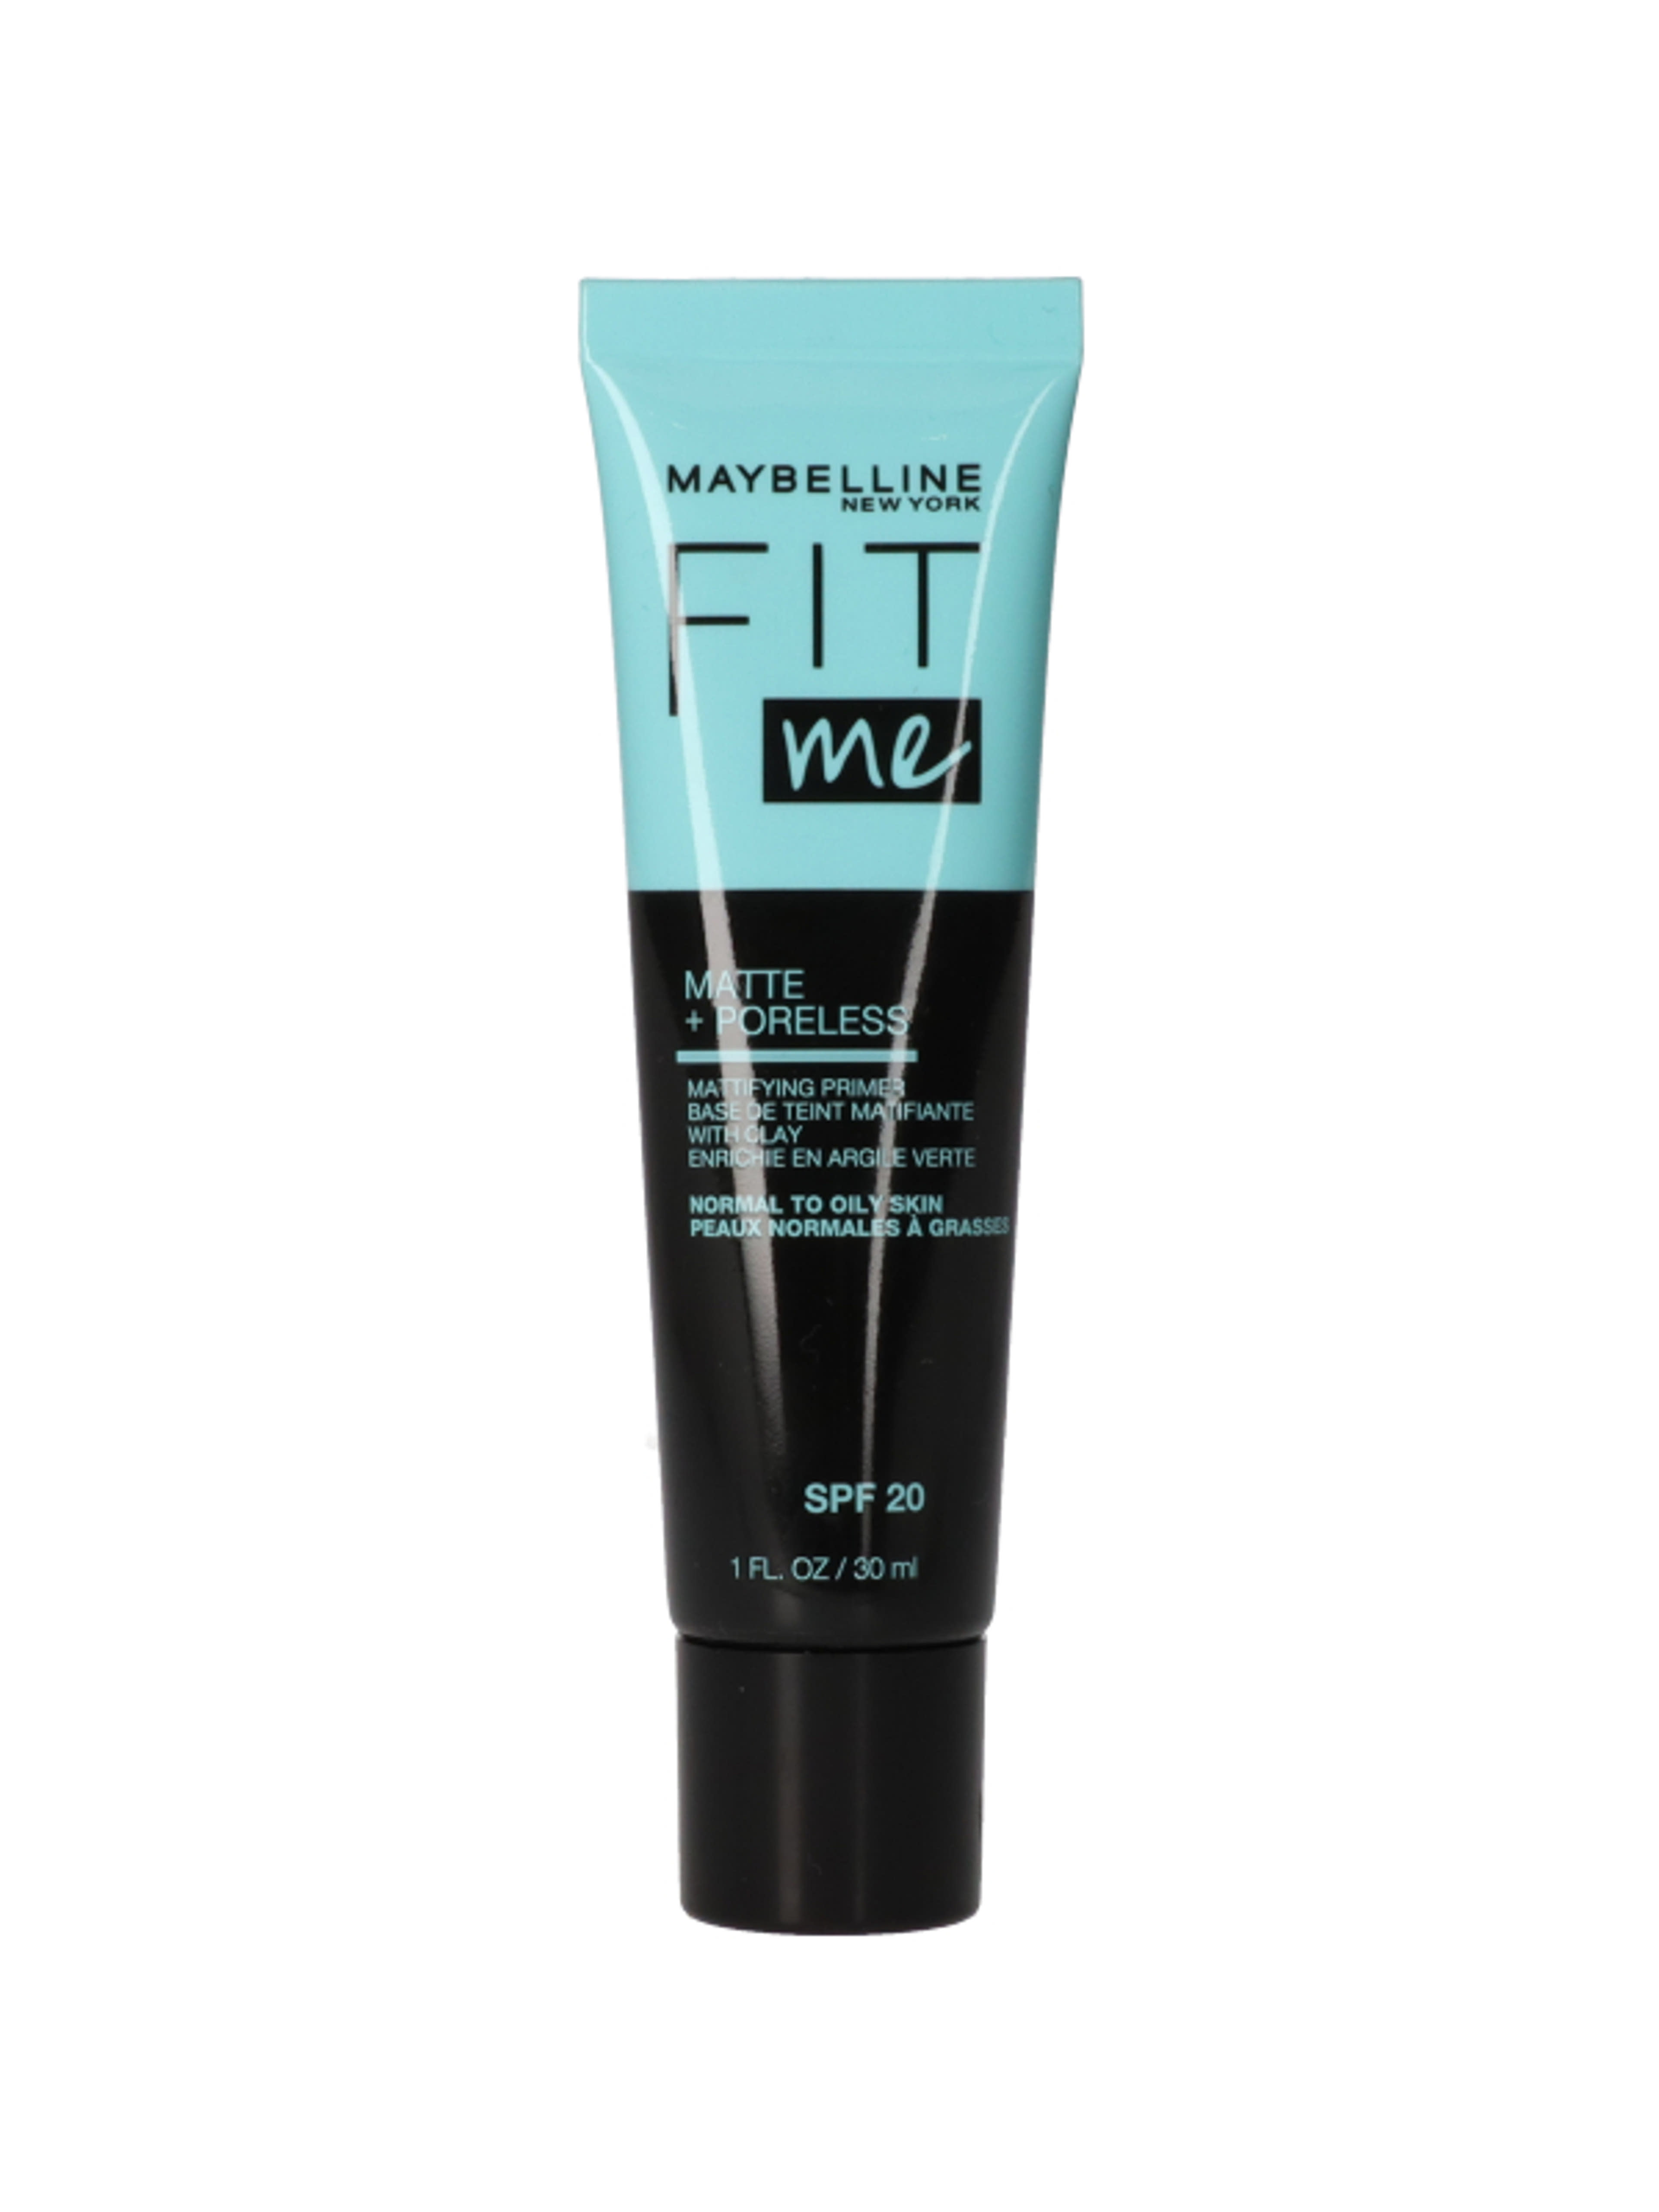 Maybelline Fit Me Matte and Poreless sminkalap - 1 db